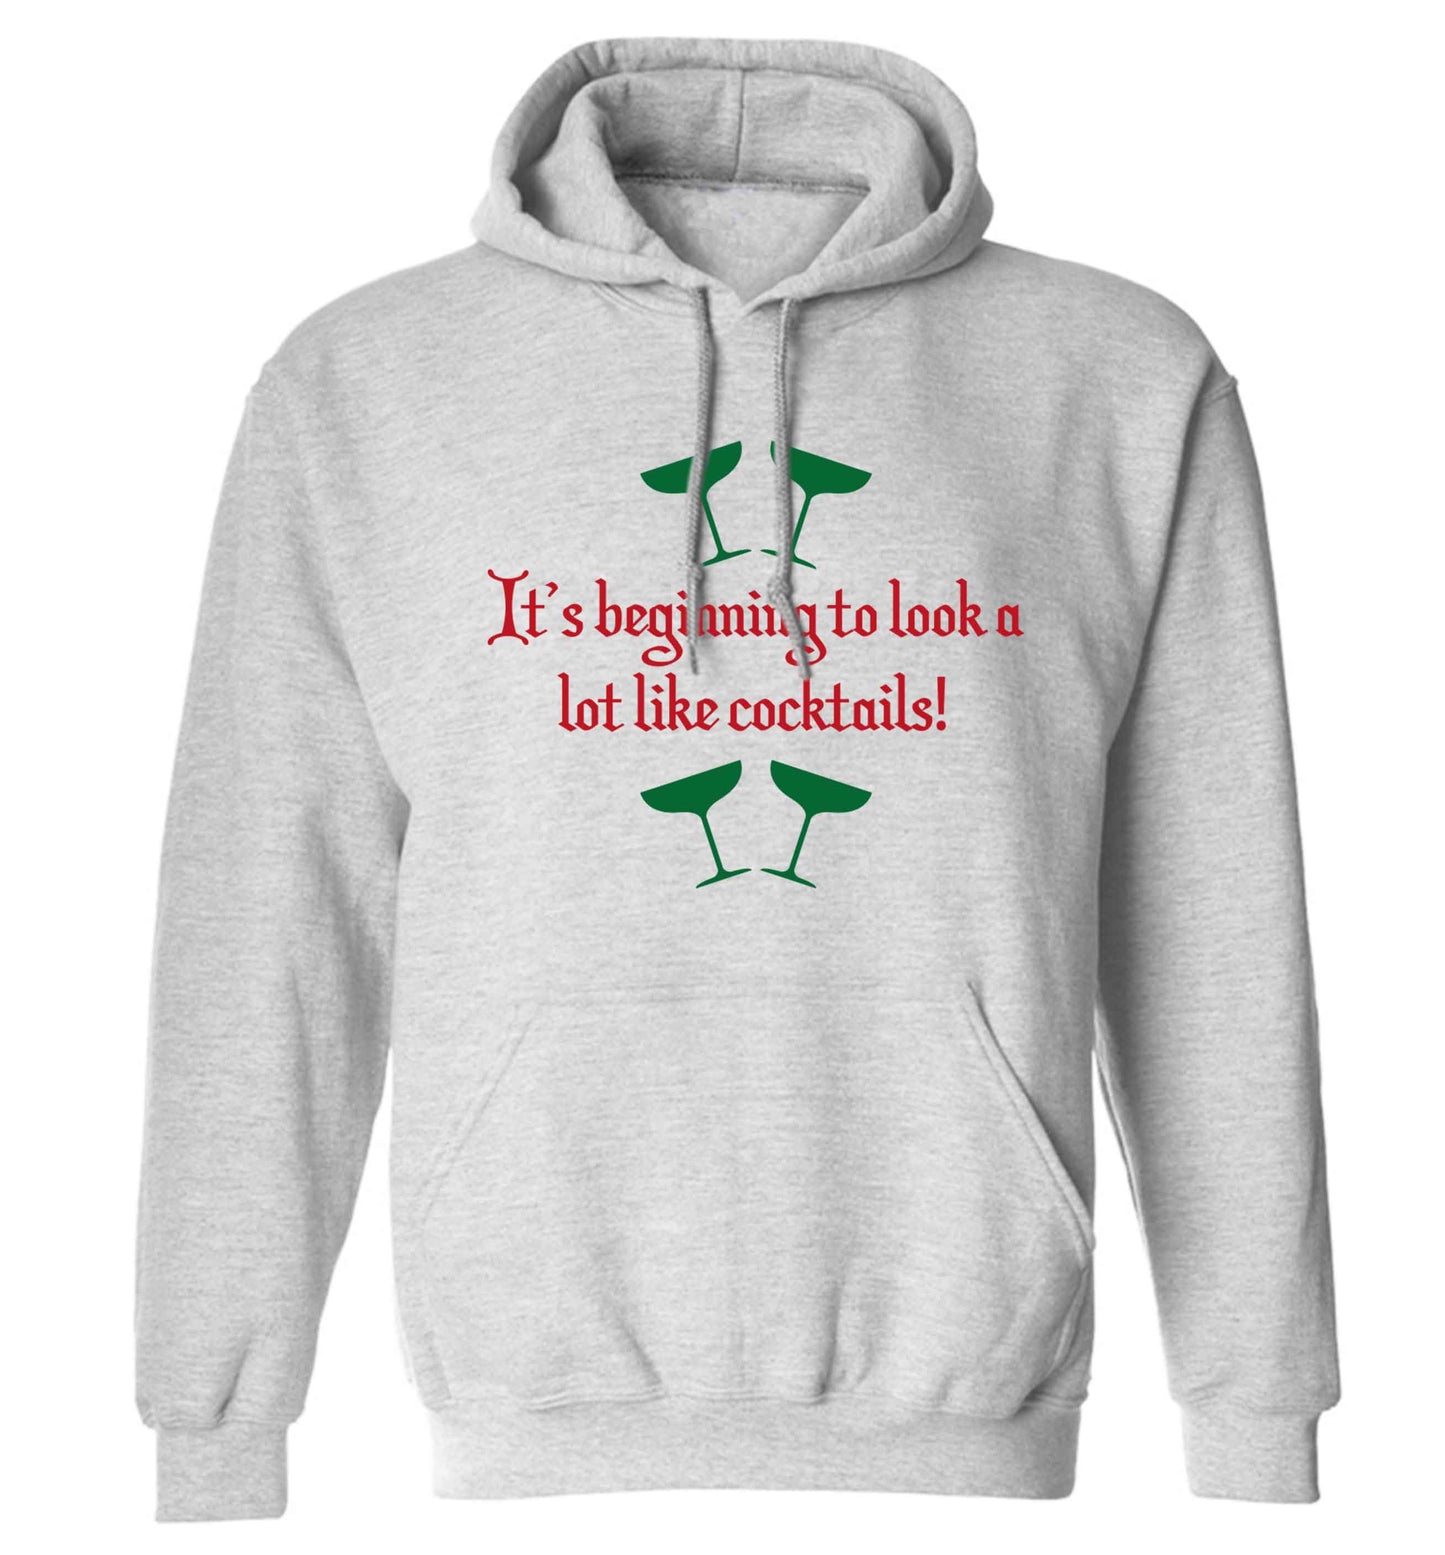 It's beginning to look a lot like cocktails adults unisex grey hoodie 2XL